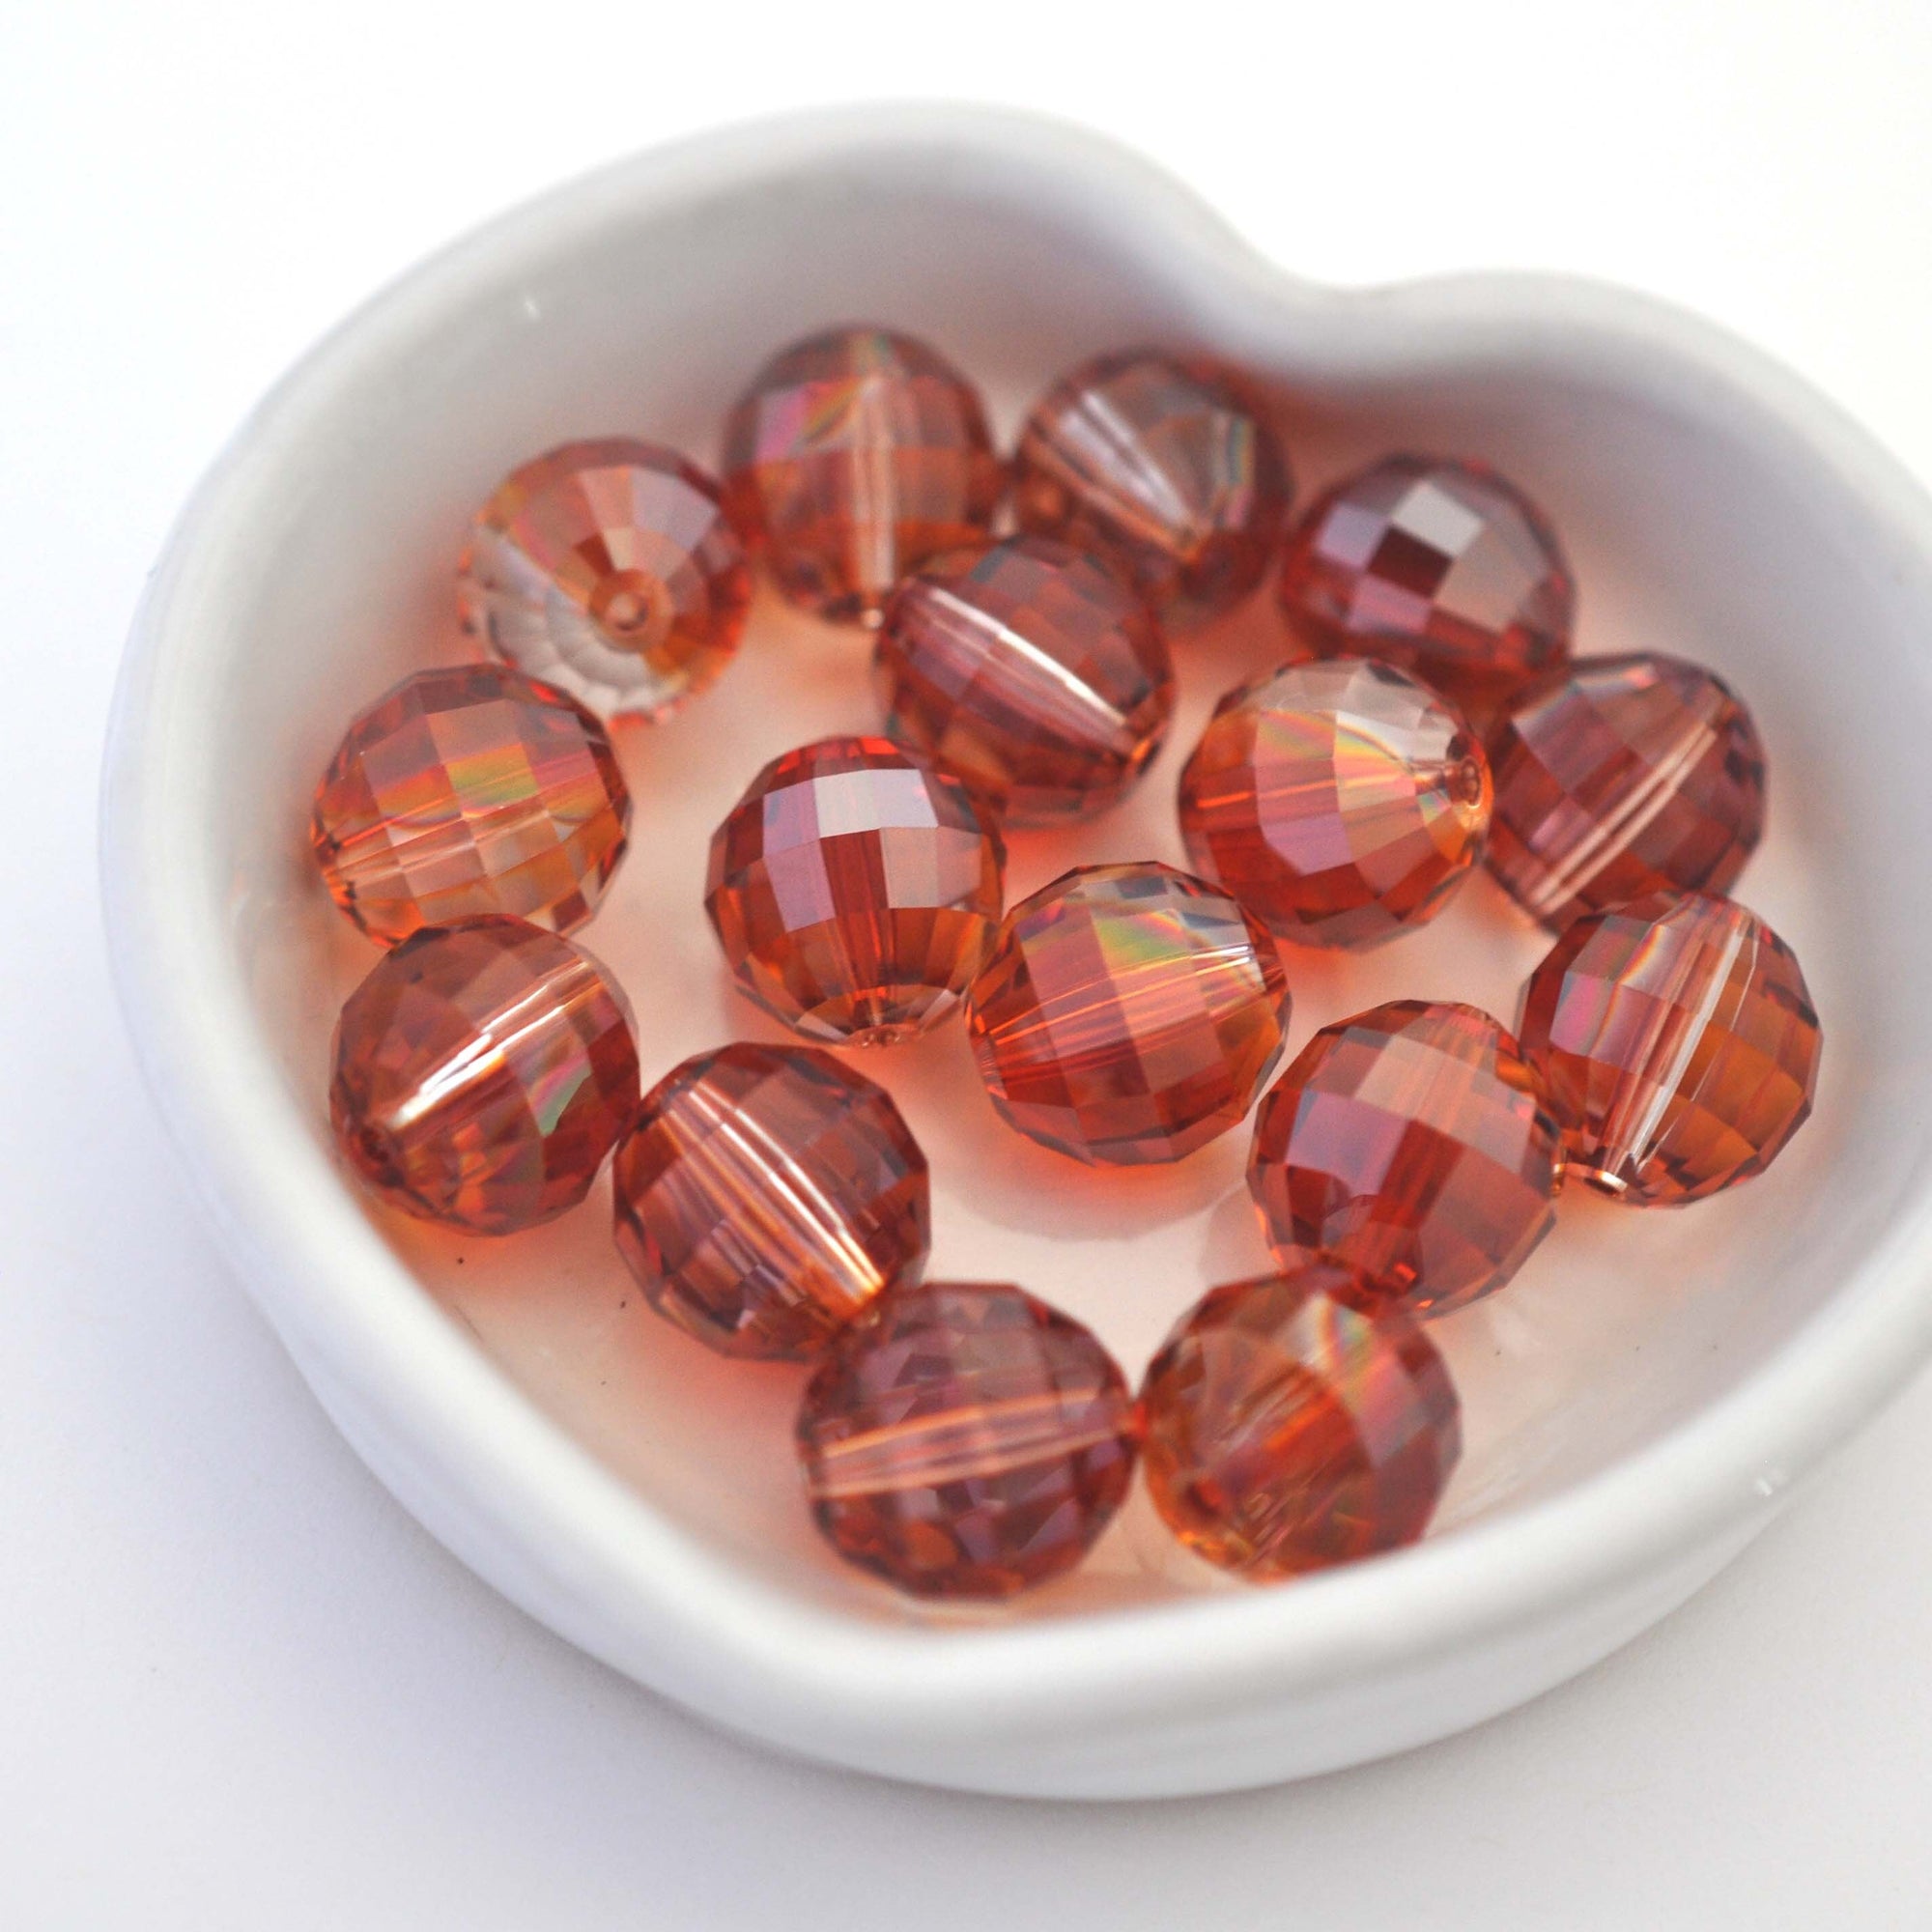 Red Magma Chessboard Beads 5005 Barton Crystal 12mm